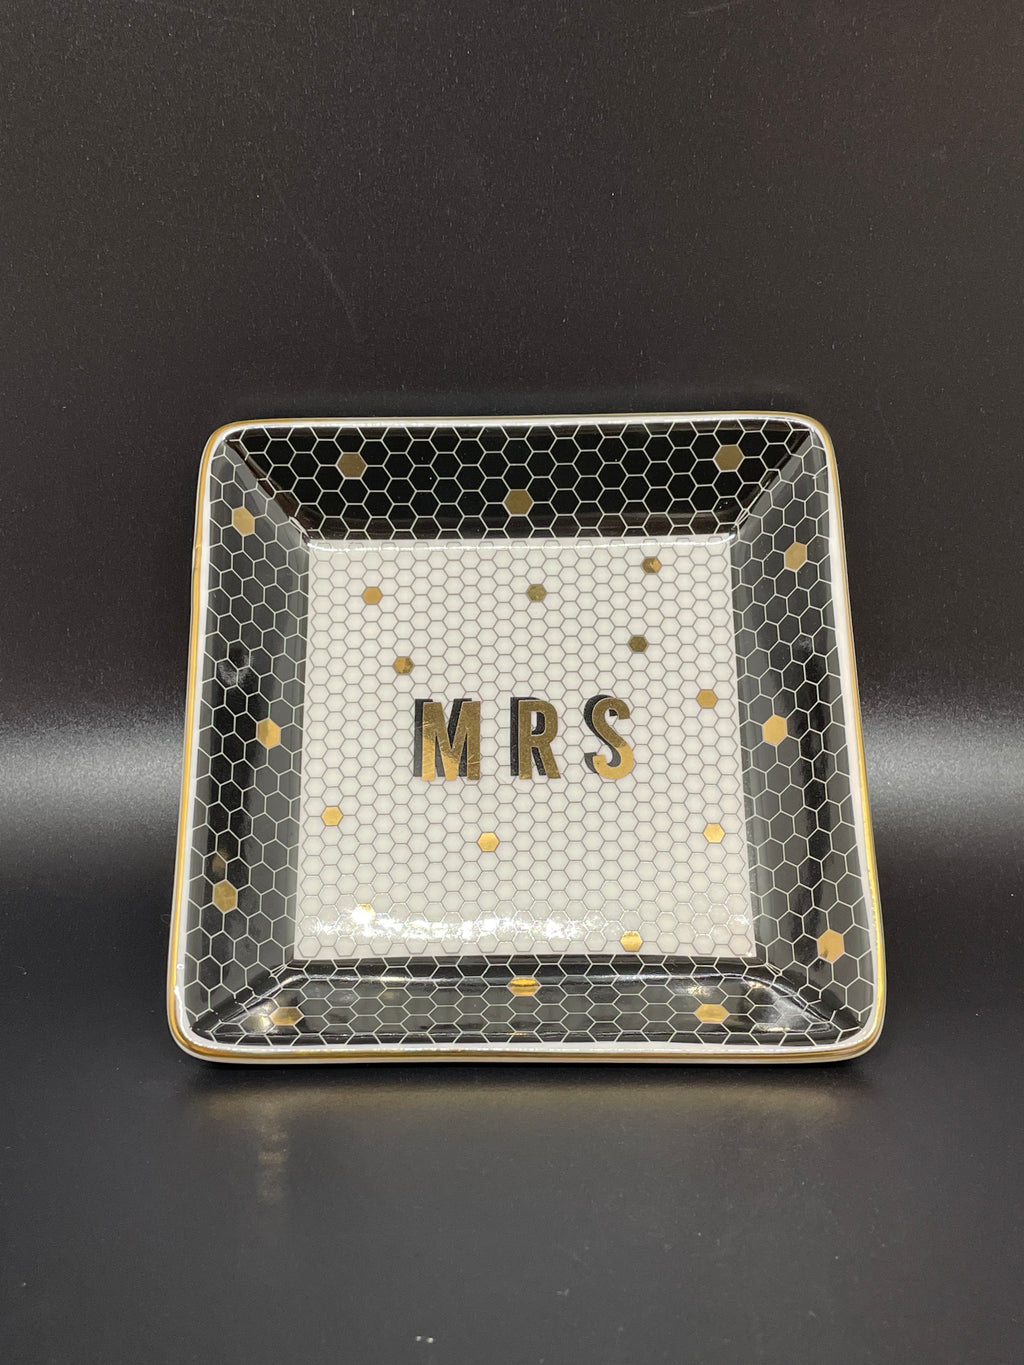 Mrs. Jewelry Dish in Black, White & Gold Honeycomb Tile